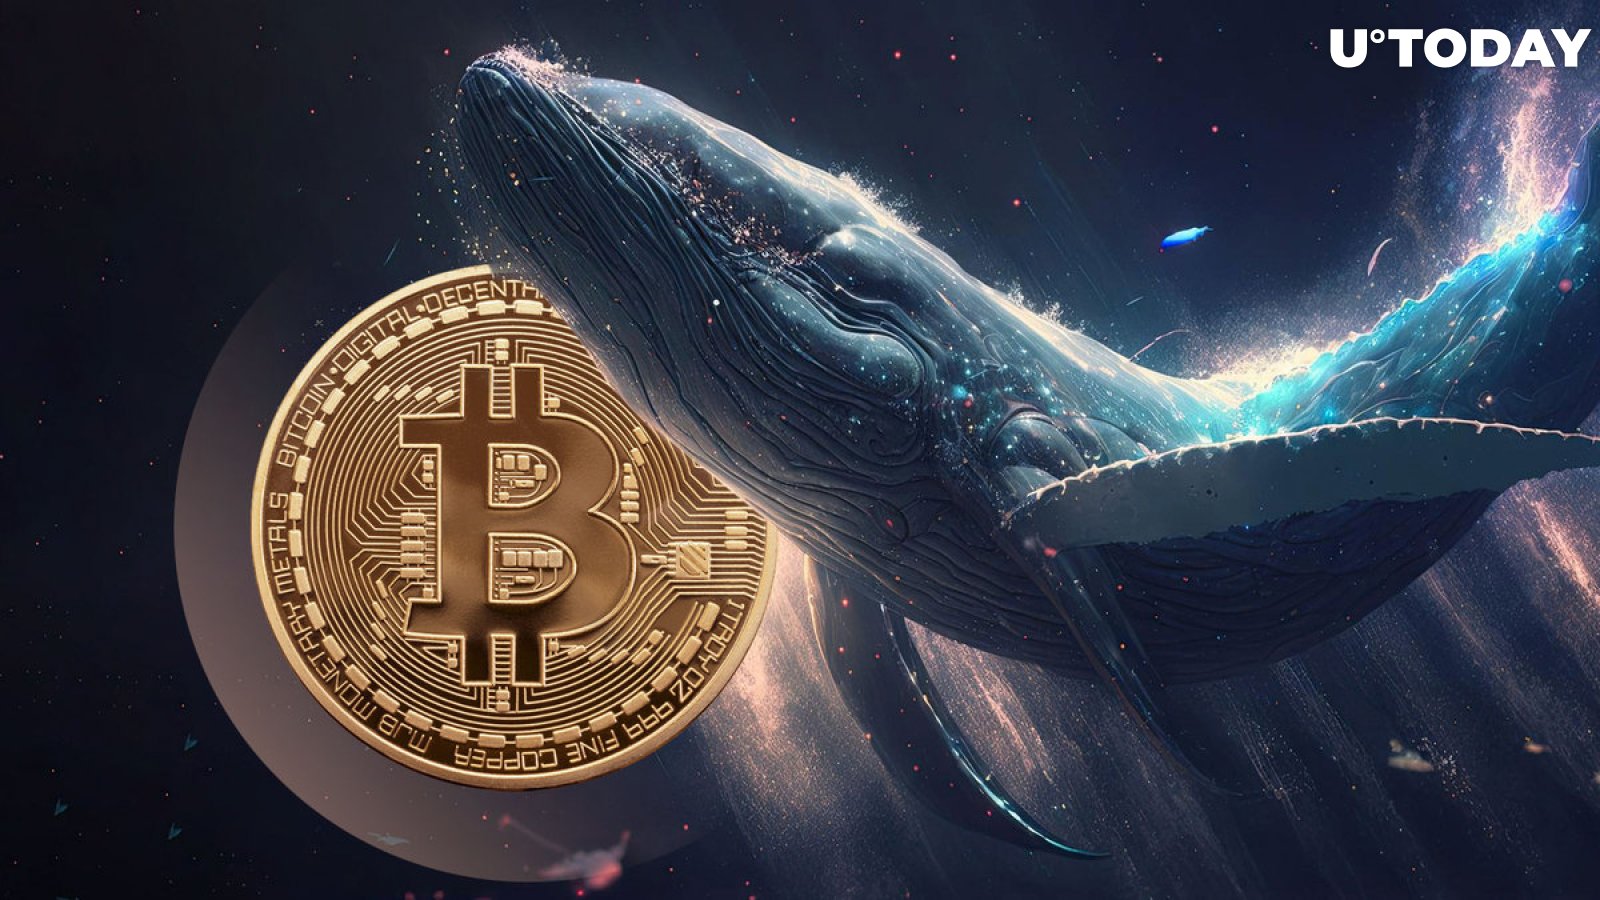 Bitcoin (BTC) Welcomes $100 Billion Wave From New Mega Whales